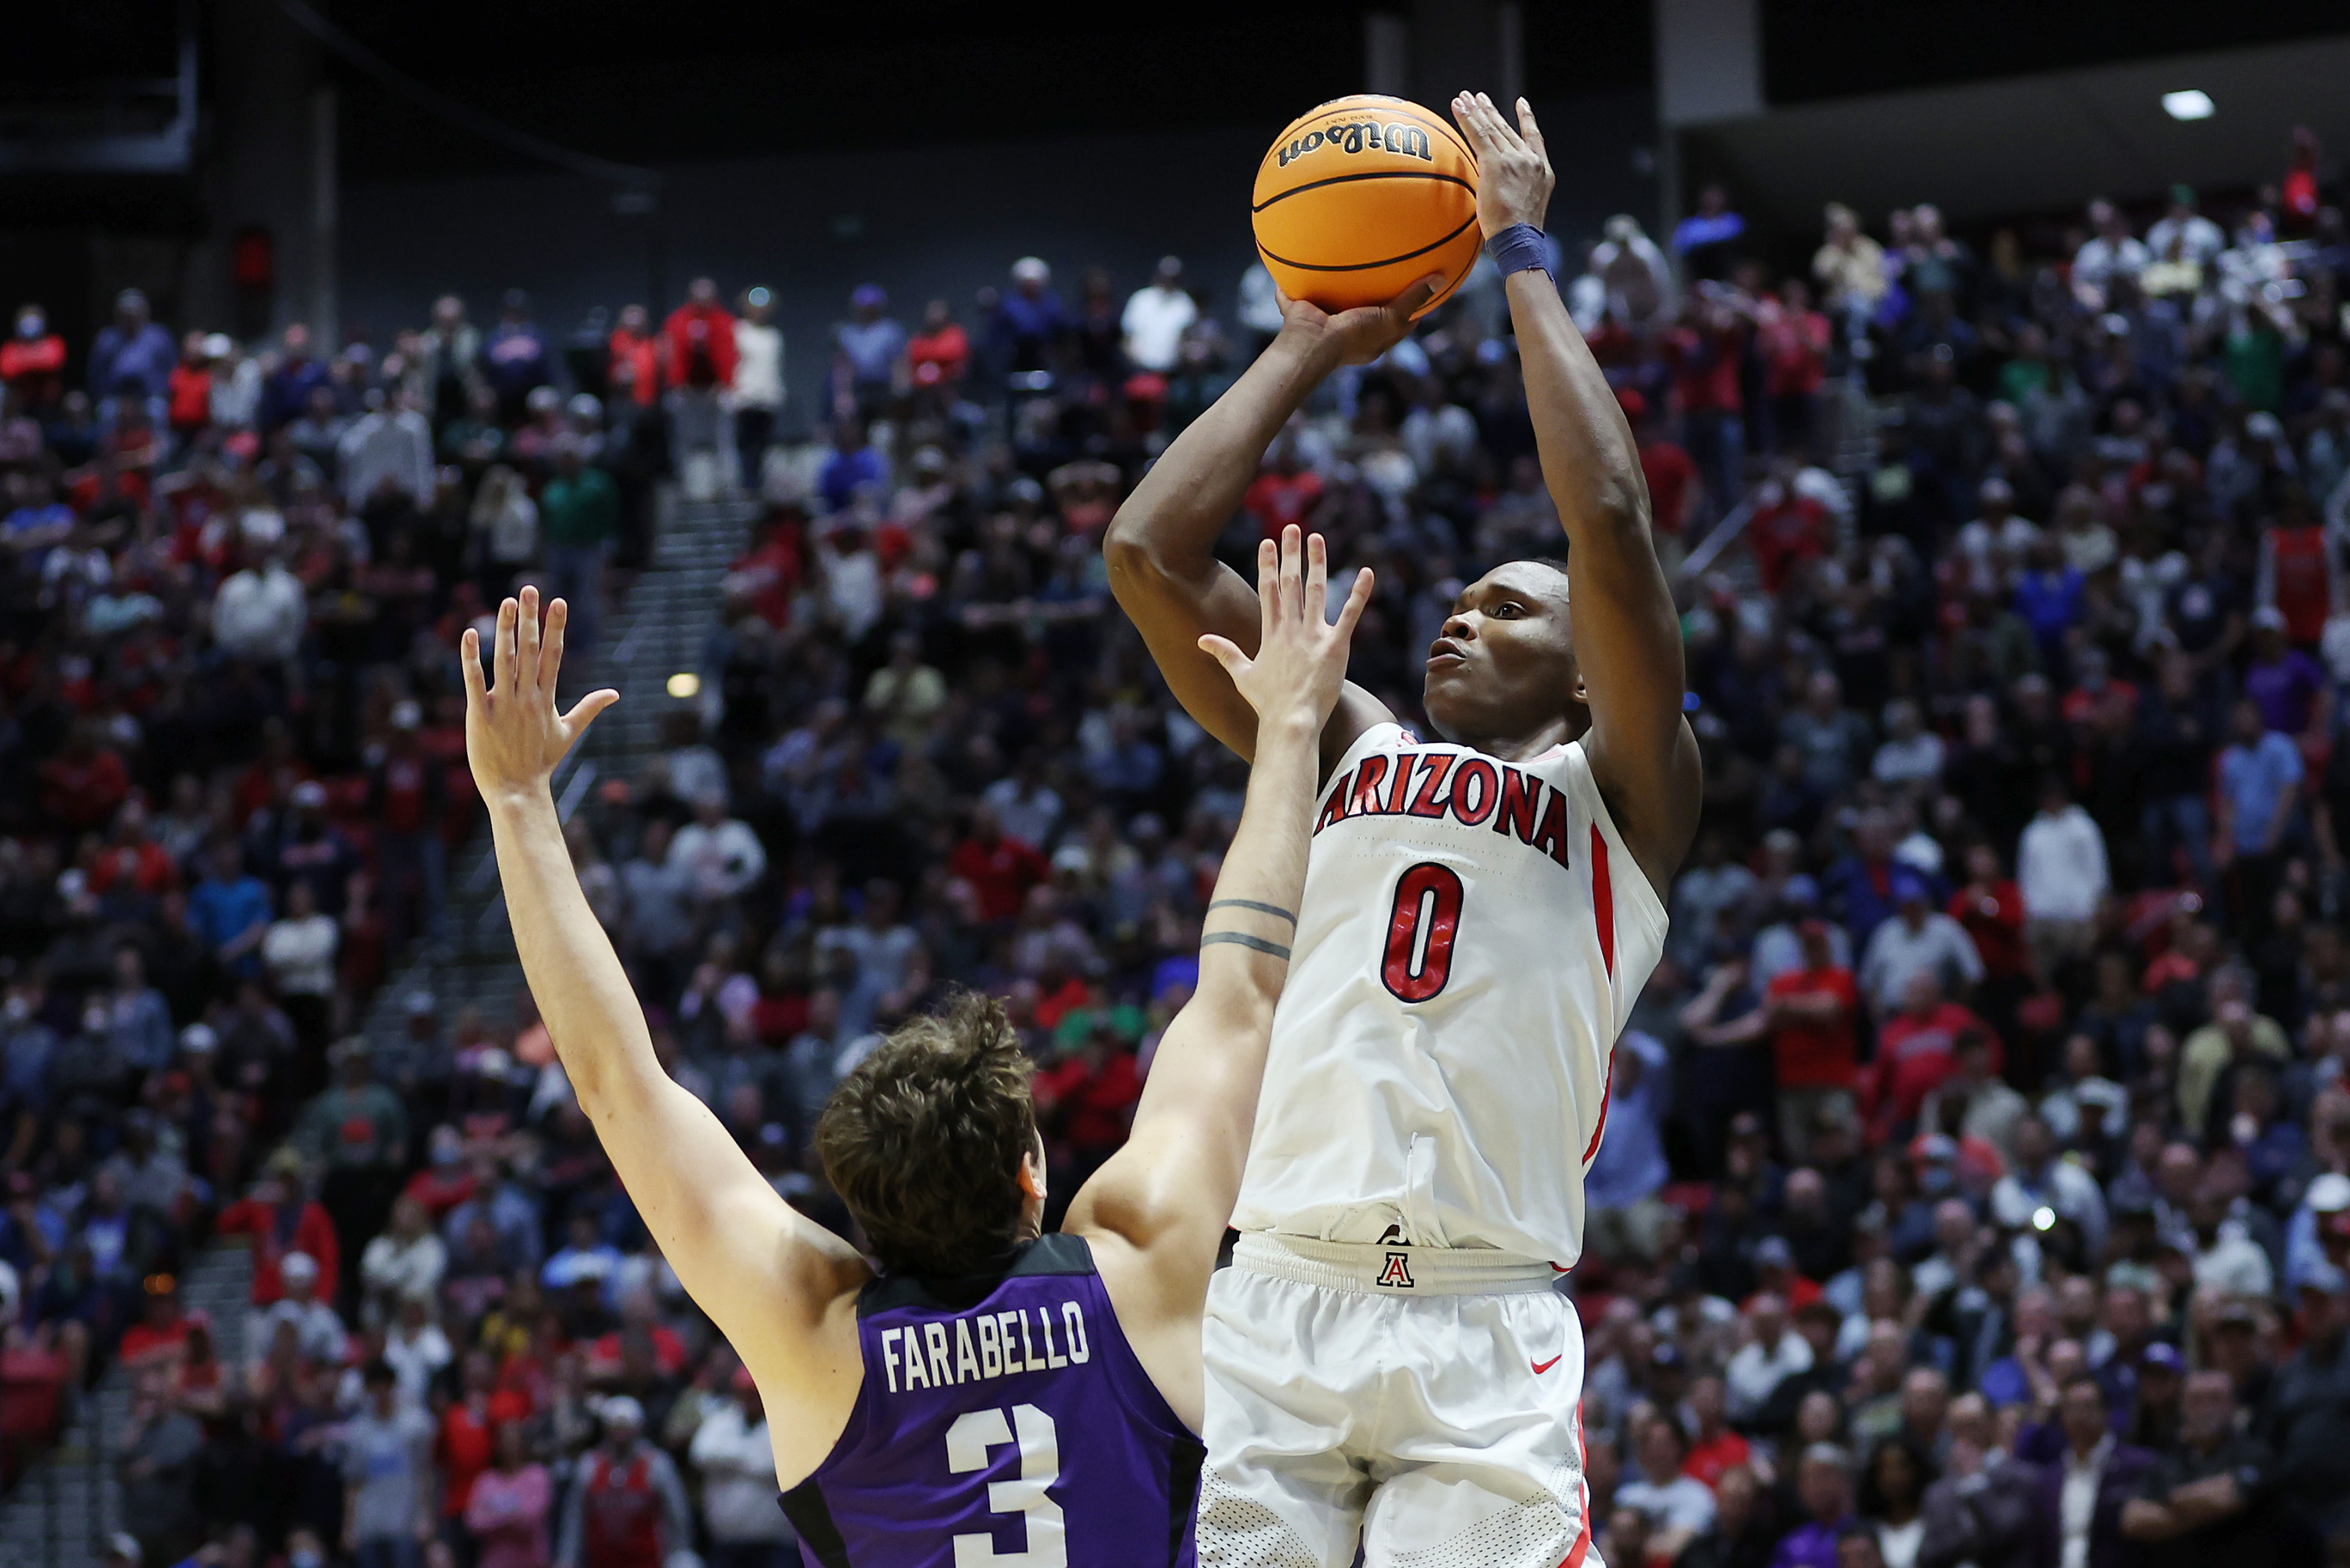 Bennedict Mathurin NBA mock draft scouting report: Strengths, weaknesses on  display with Arizona in NCAA Tournament Sweet 16